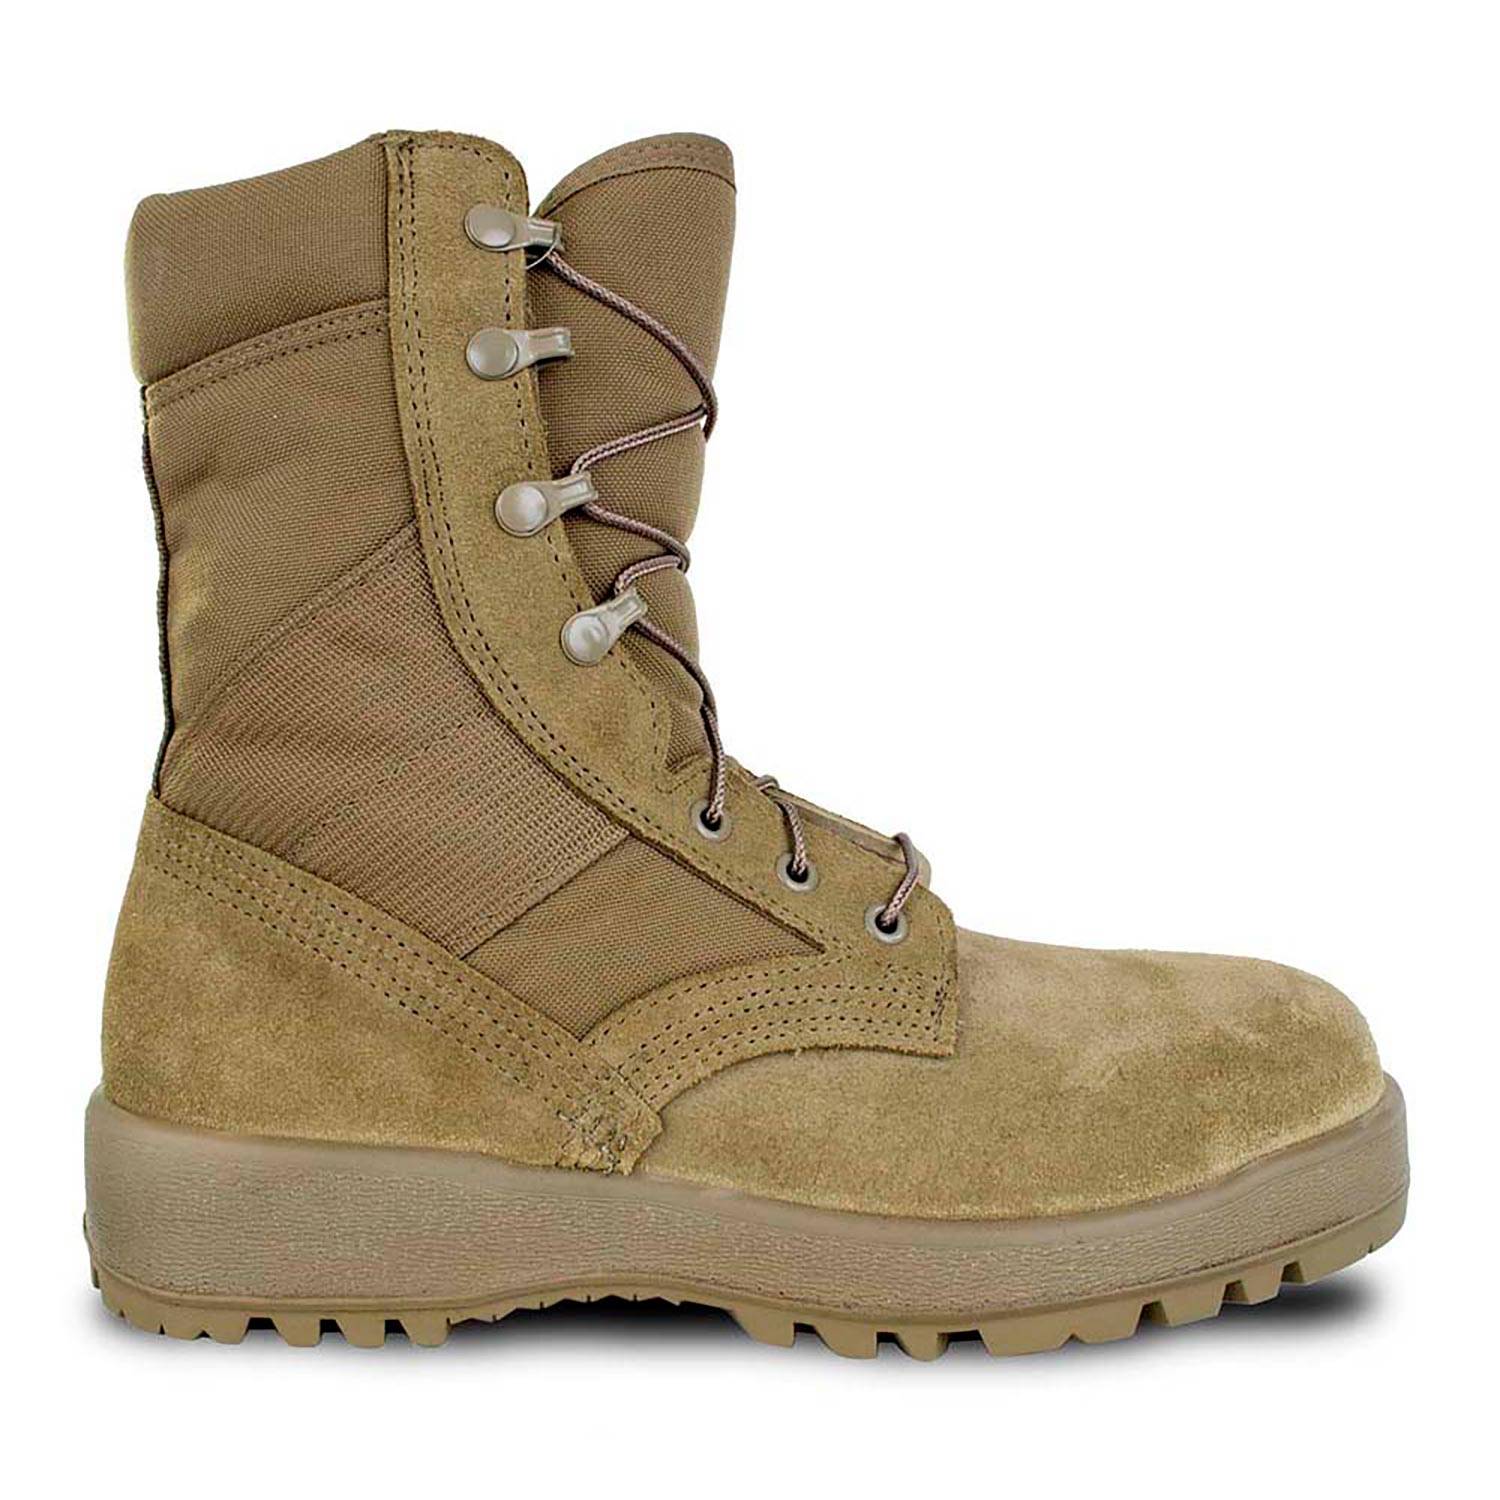 McRae Hot Weather Steel Toe Military Boots